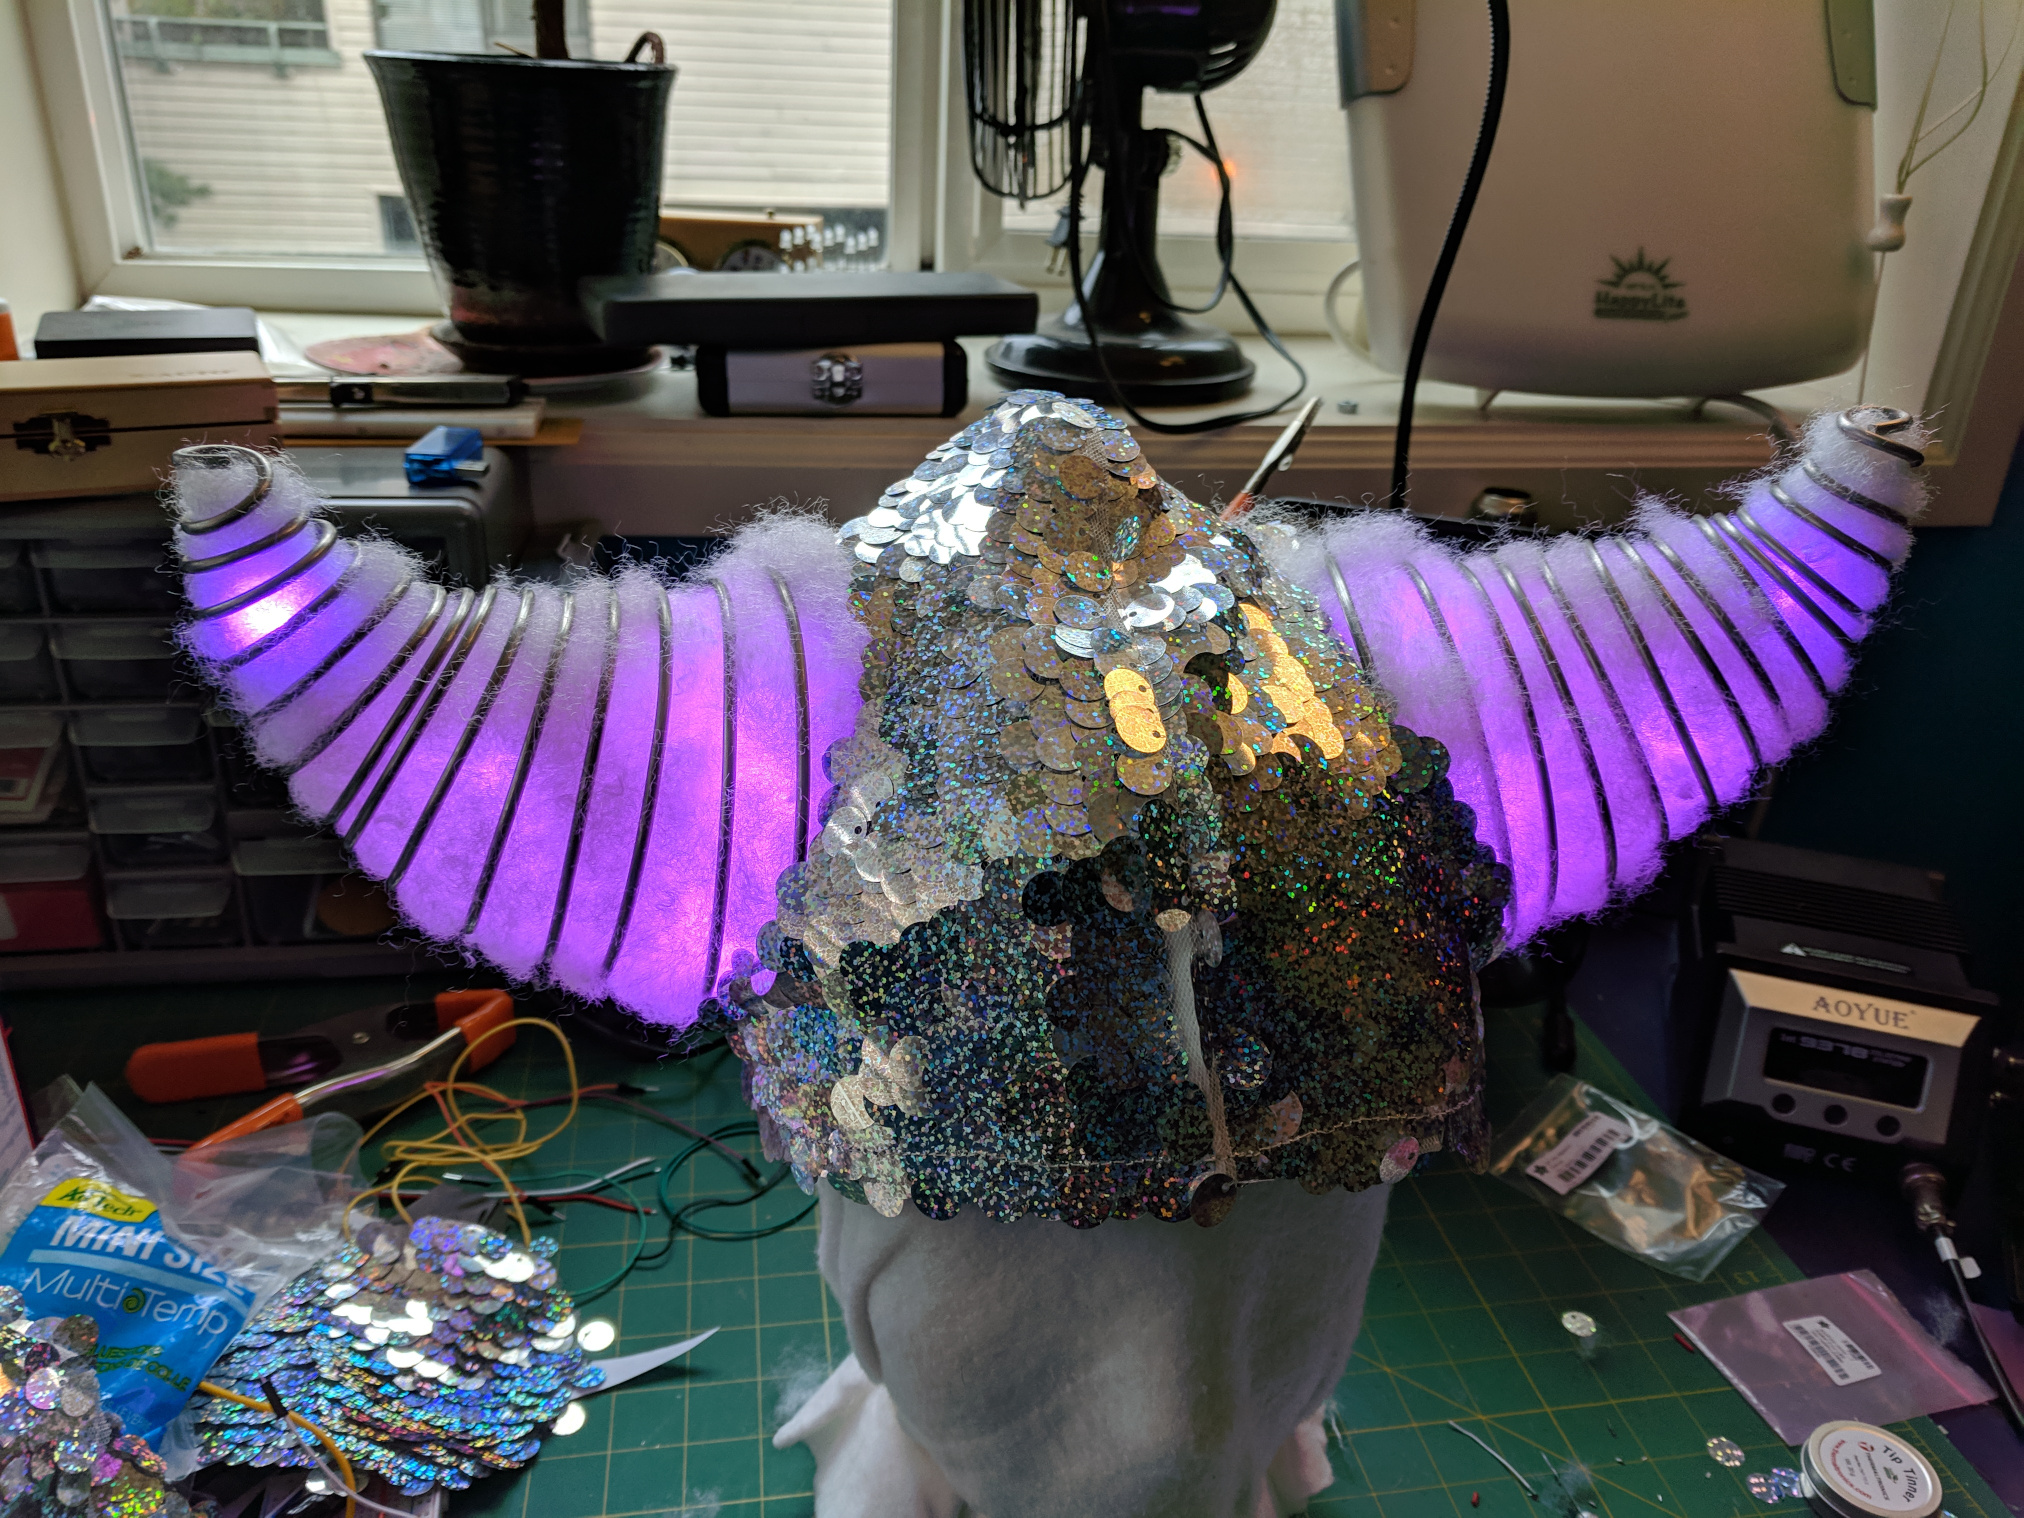 Assembled helmet with holographic sequin fabric covering and stuffed horns glowing with LEDs